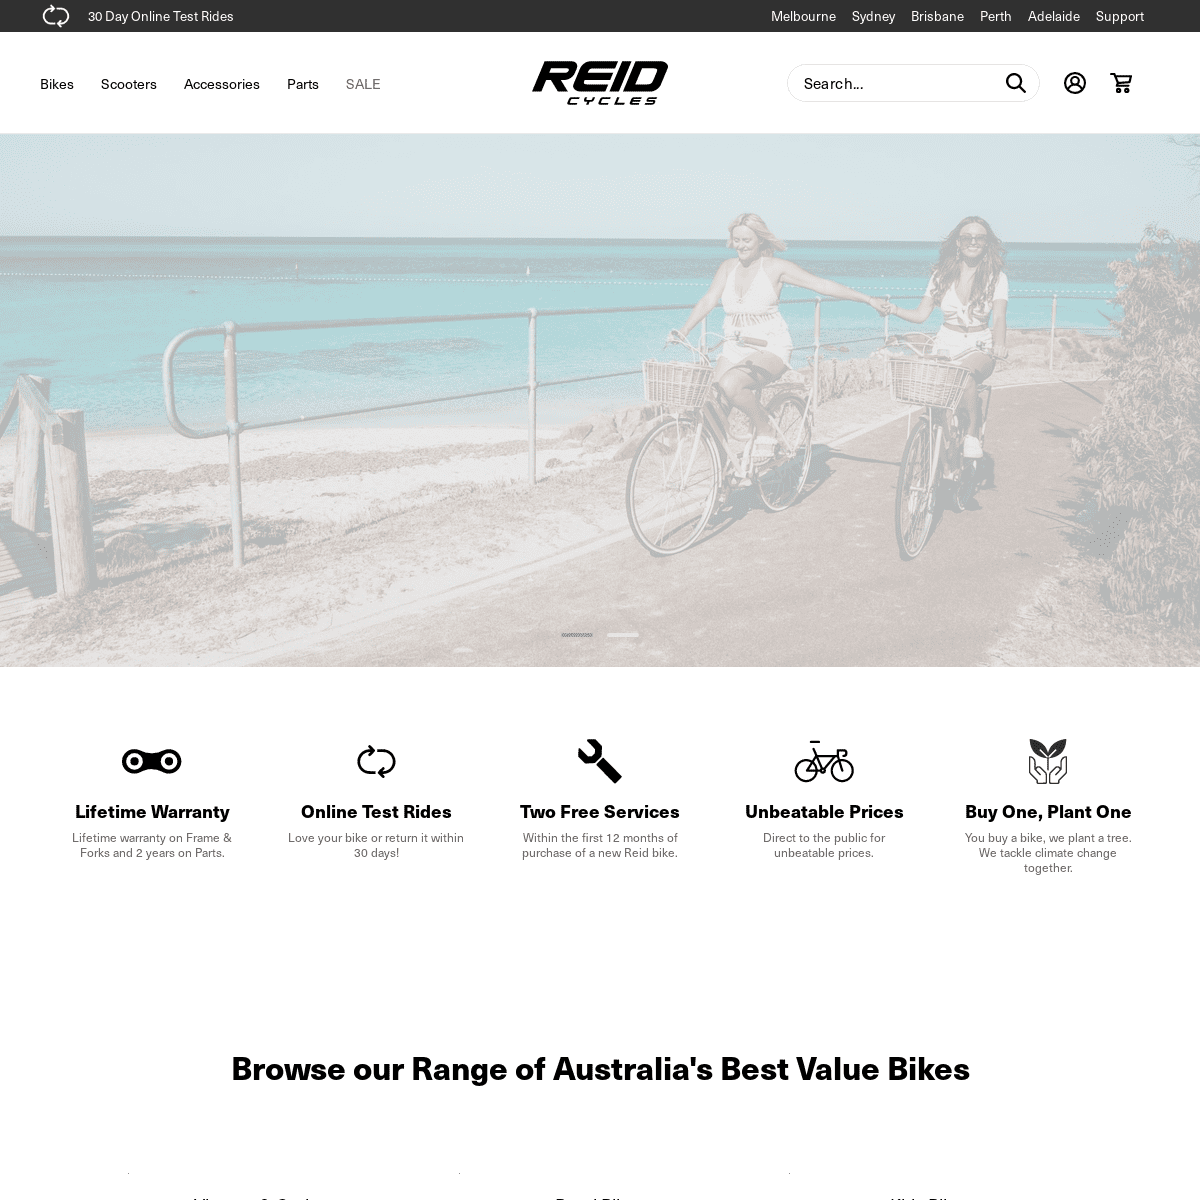 A complete backup of https://reidcycles.com.au